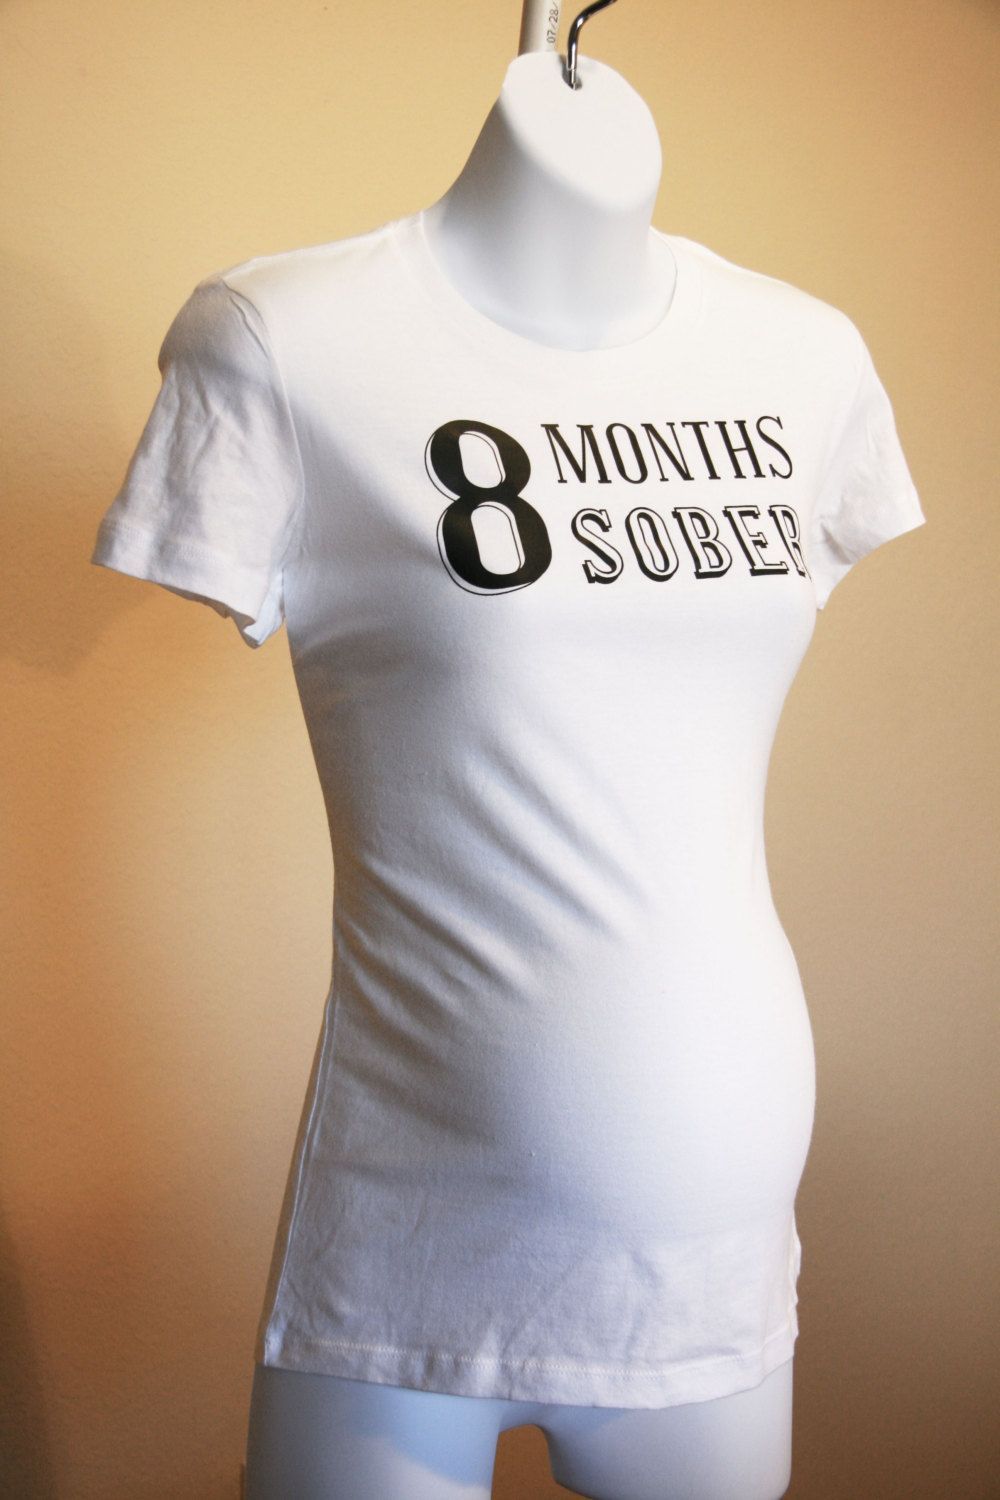 Favorite maternity shirts ever!